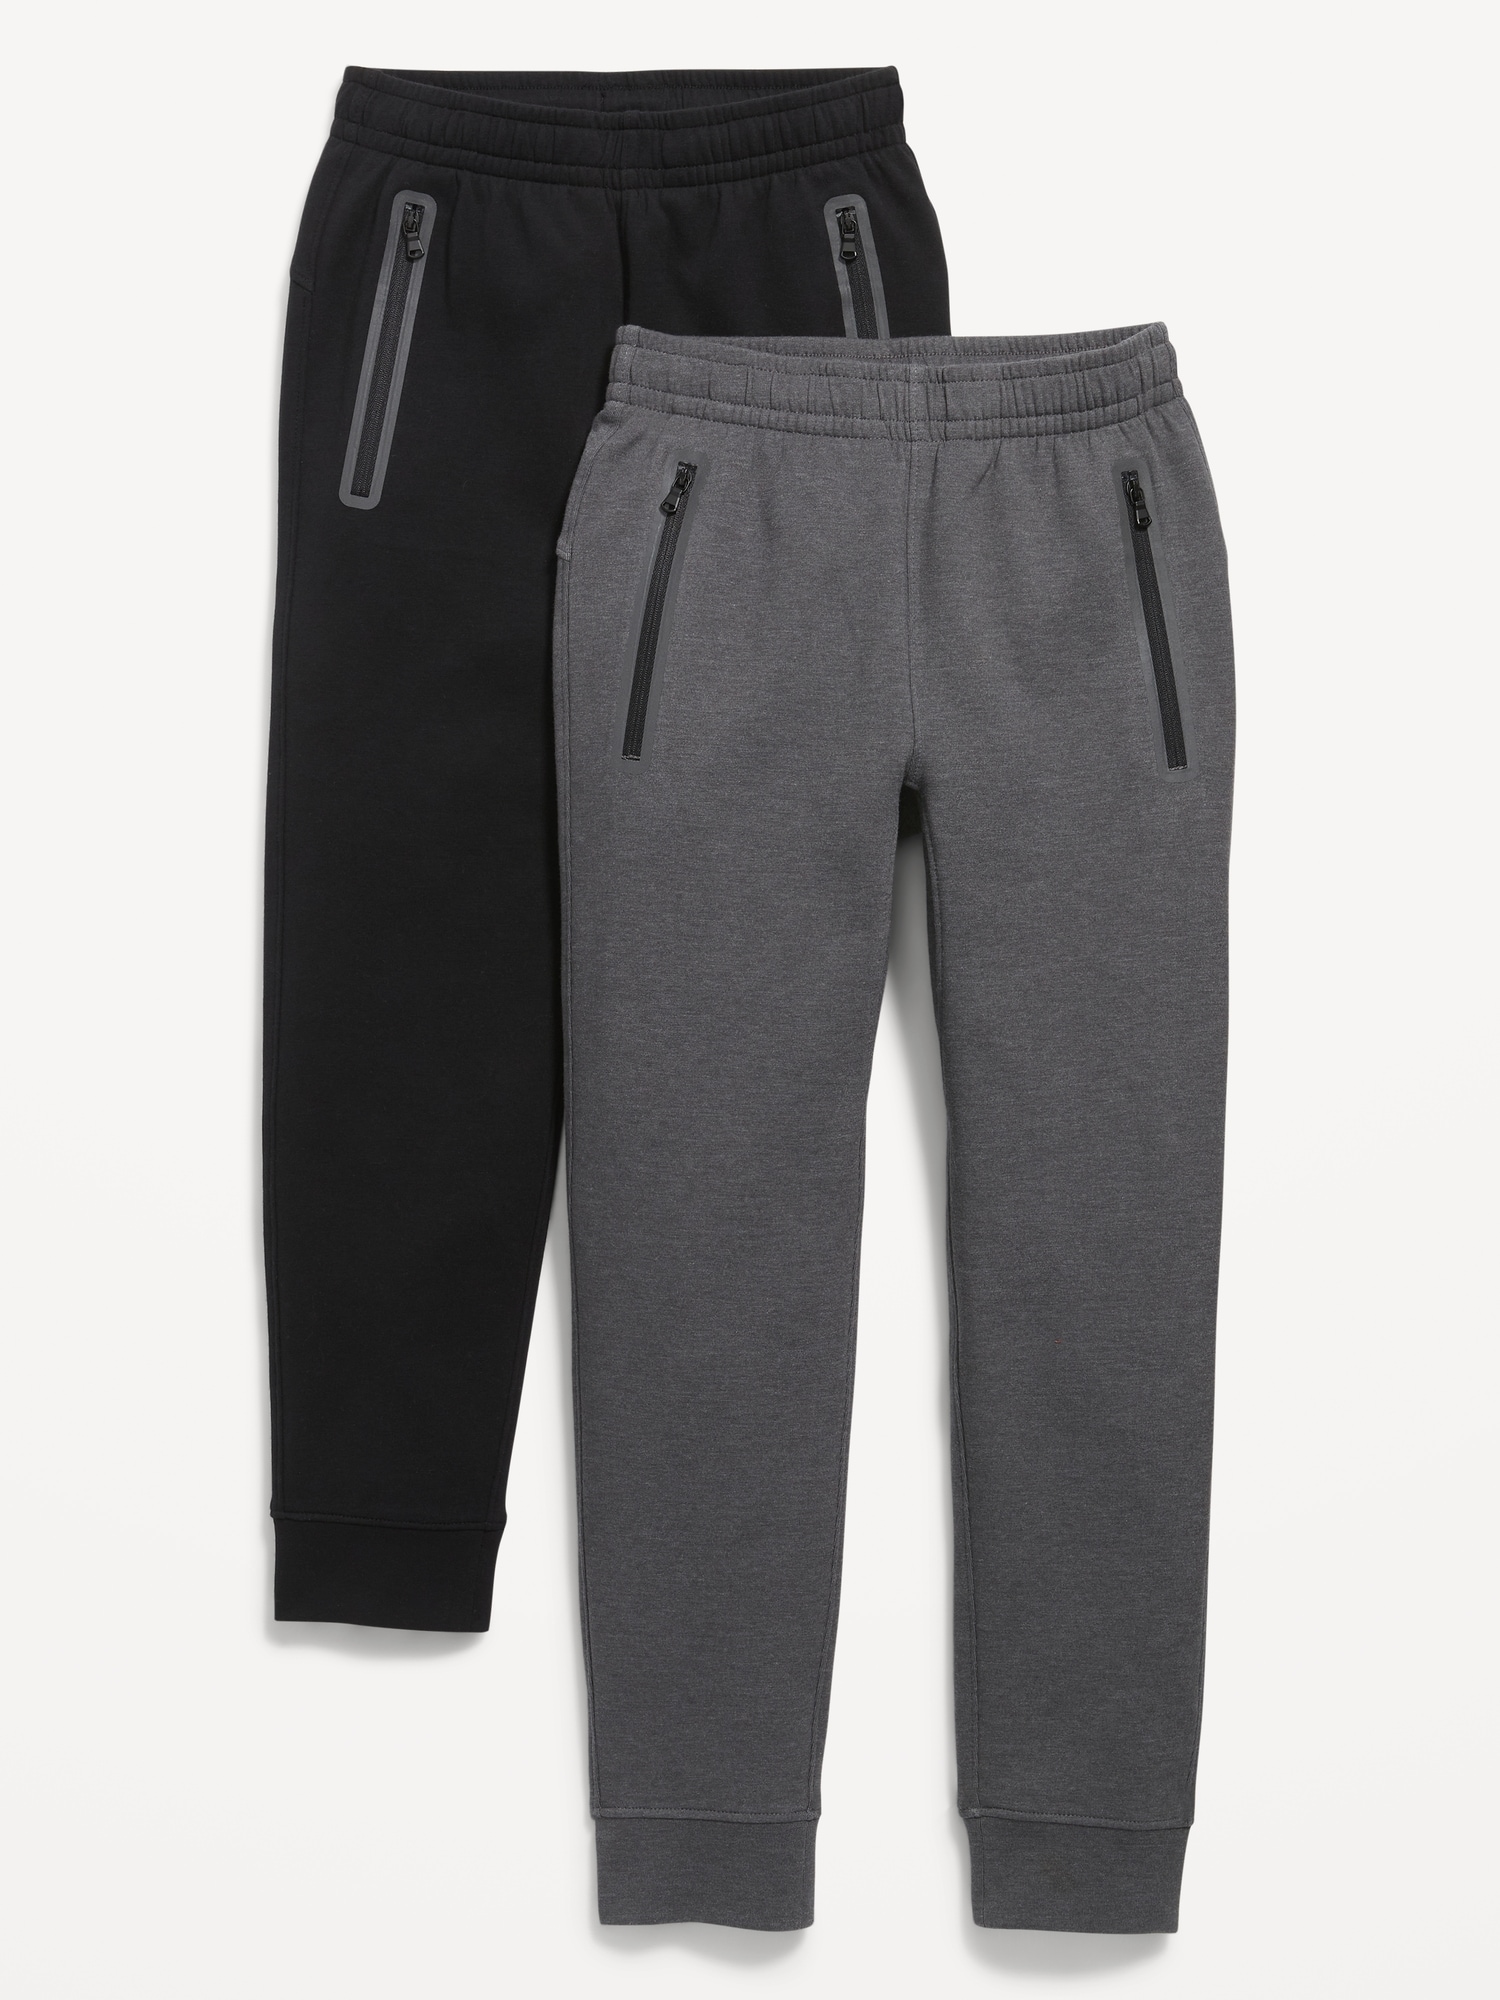 Old Navy Dynamic Fleece Jogger Sweatpants 2-Pack for Boys